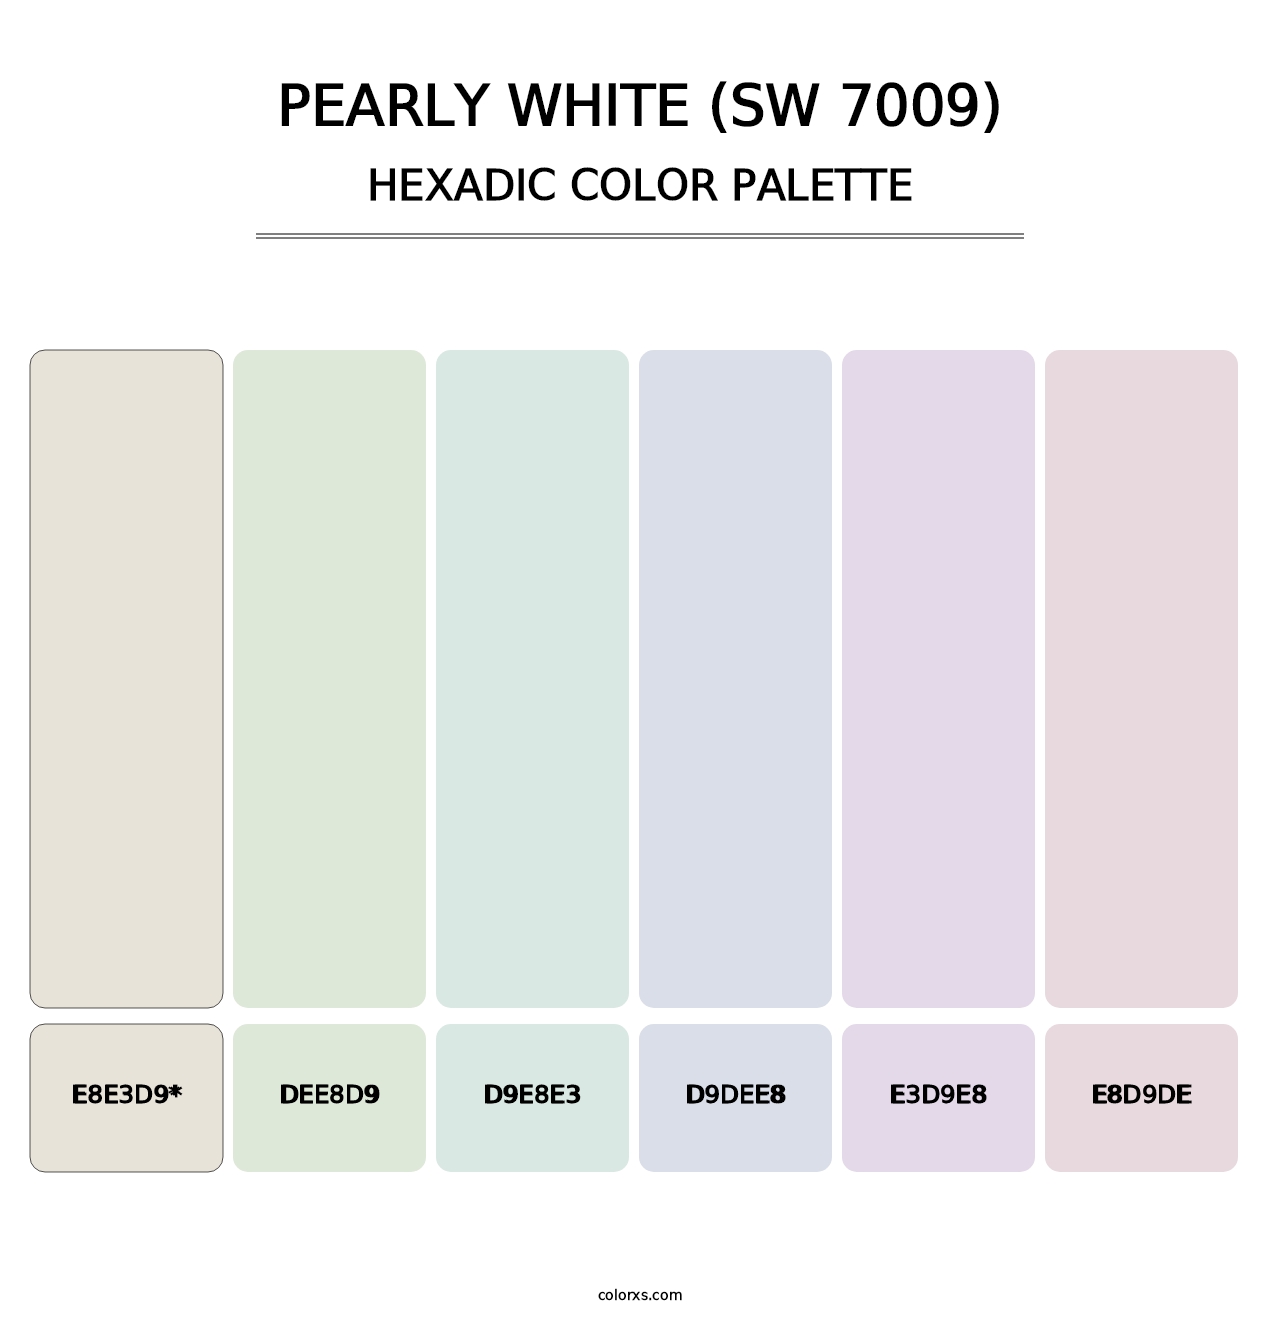 Pearly White (SW 7009) - Hexadic Color Palette